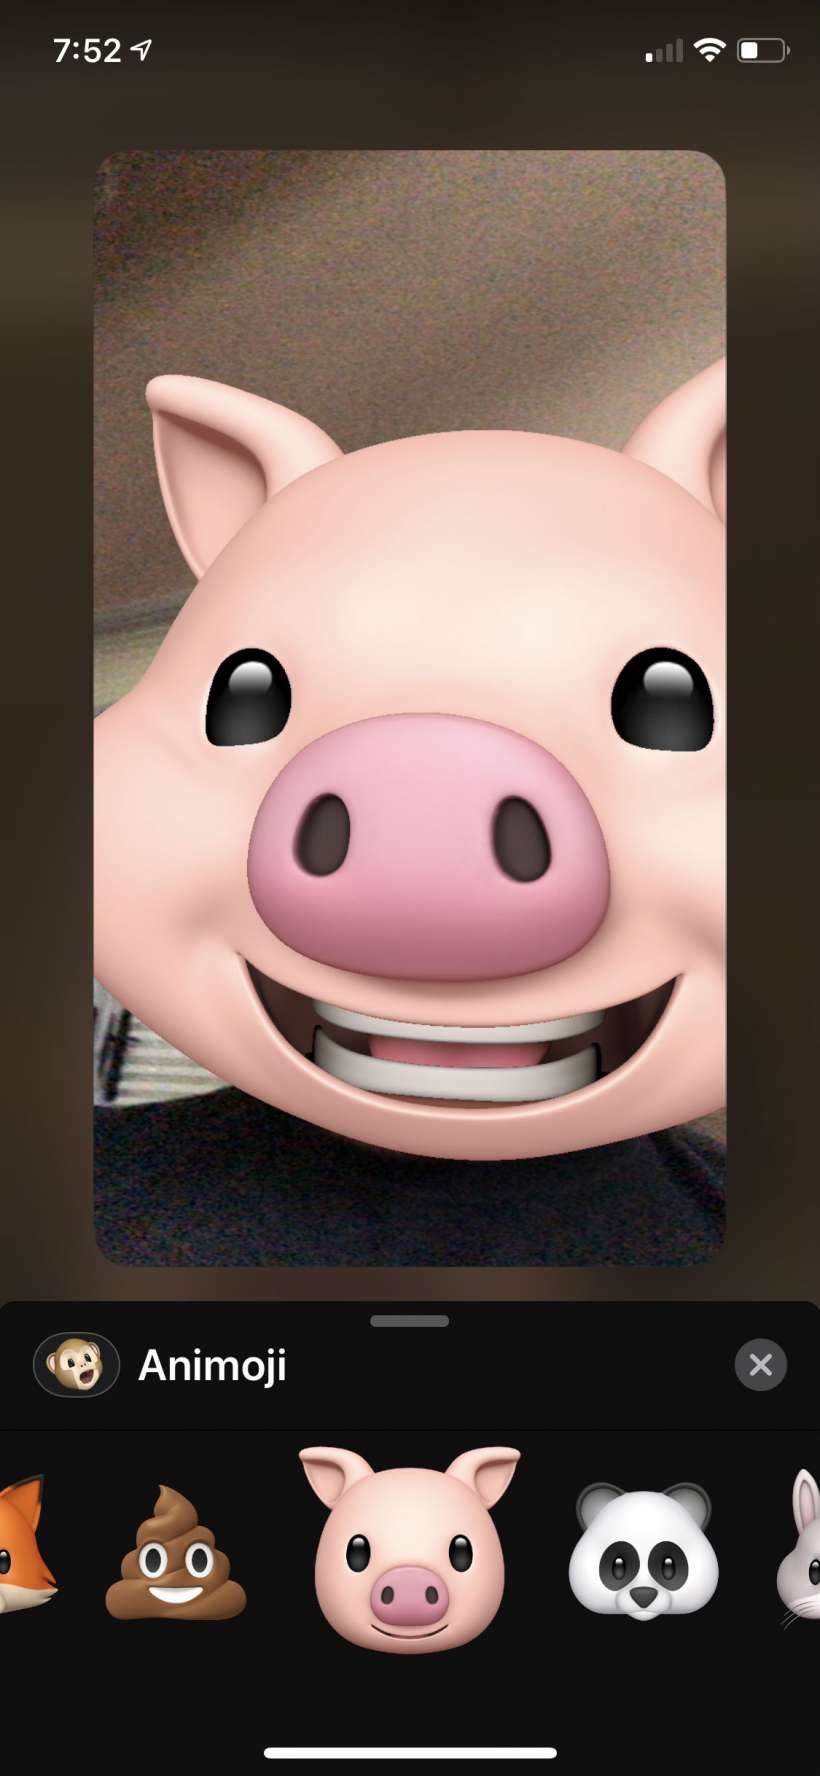 How to use Animoji and Memoji on FaceTime video calls on iPhone and iPad.